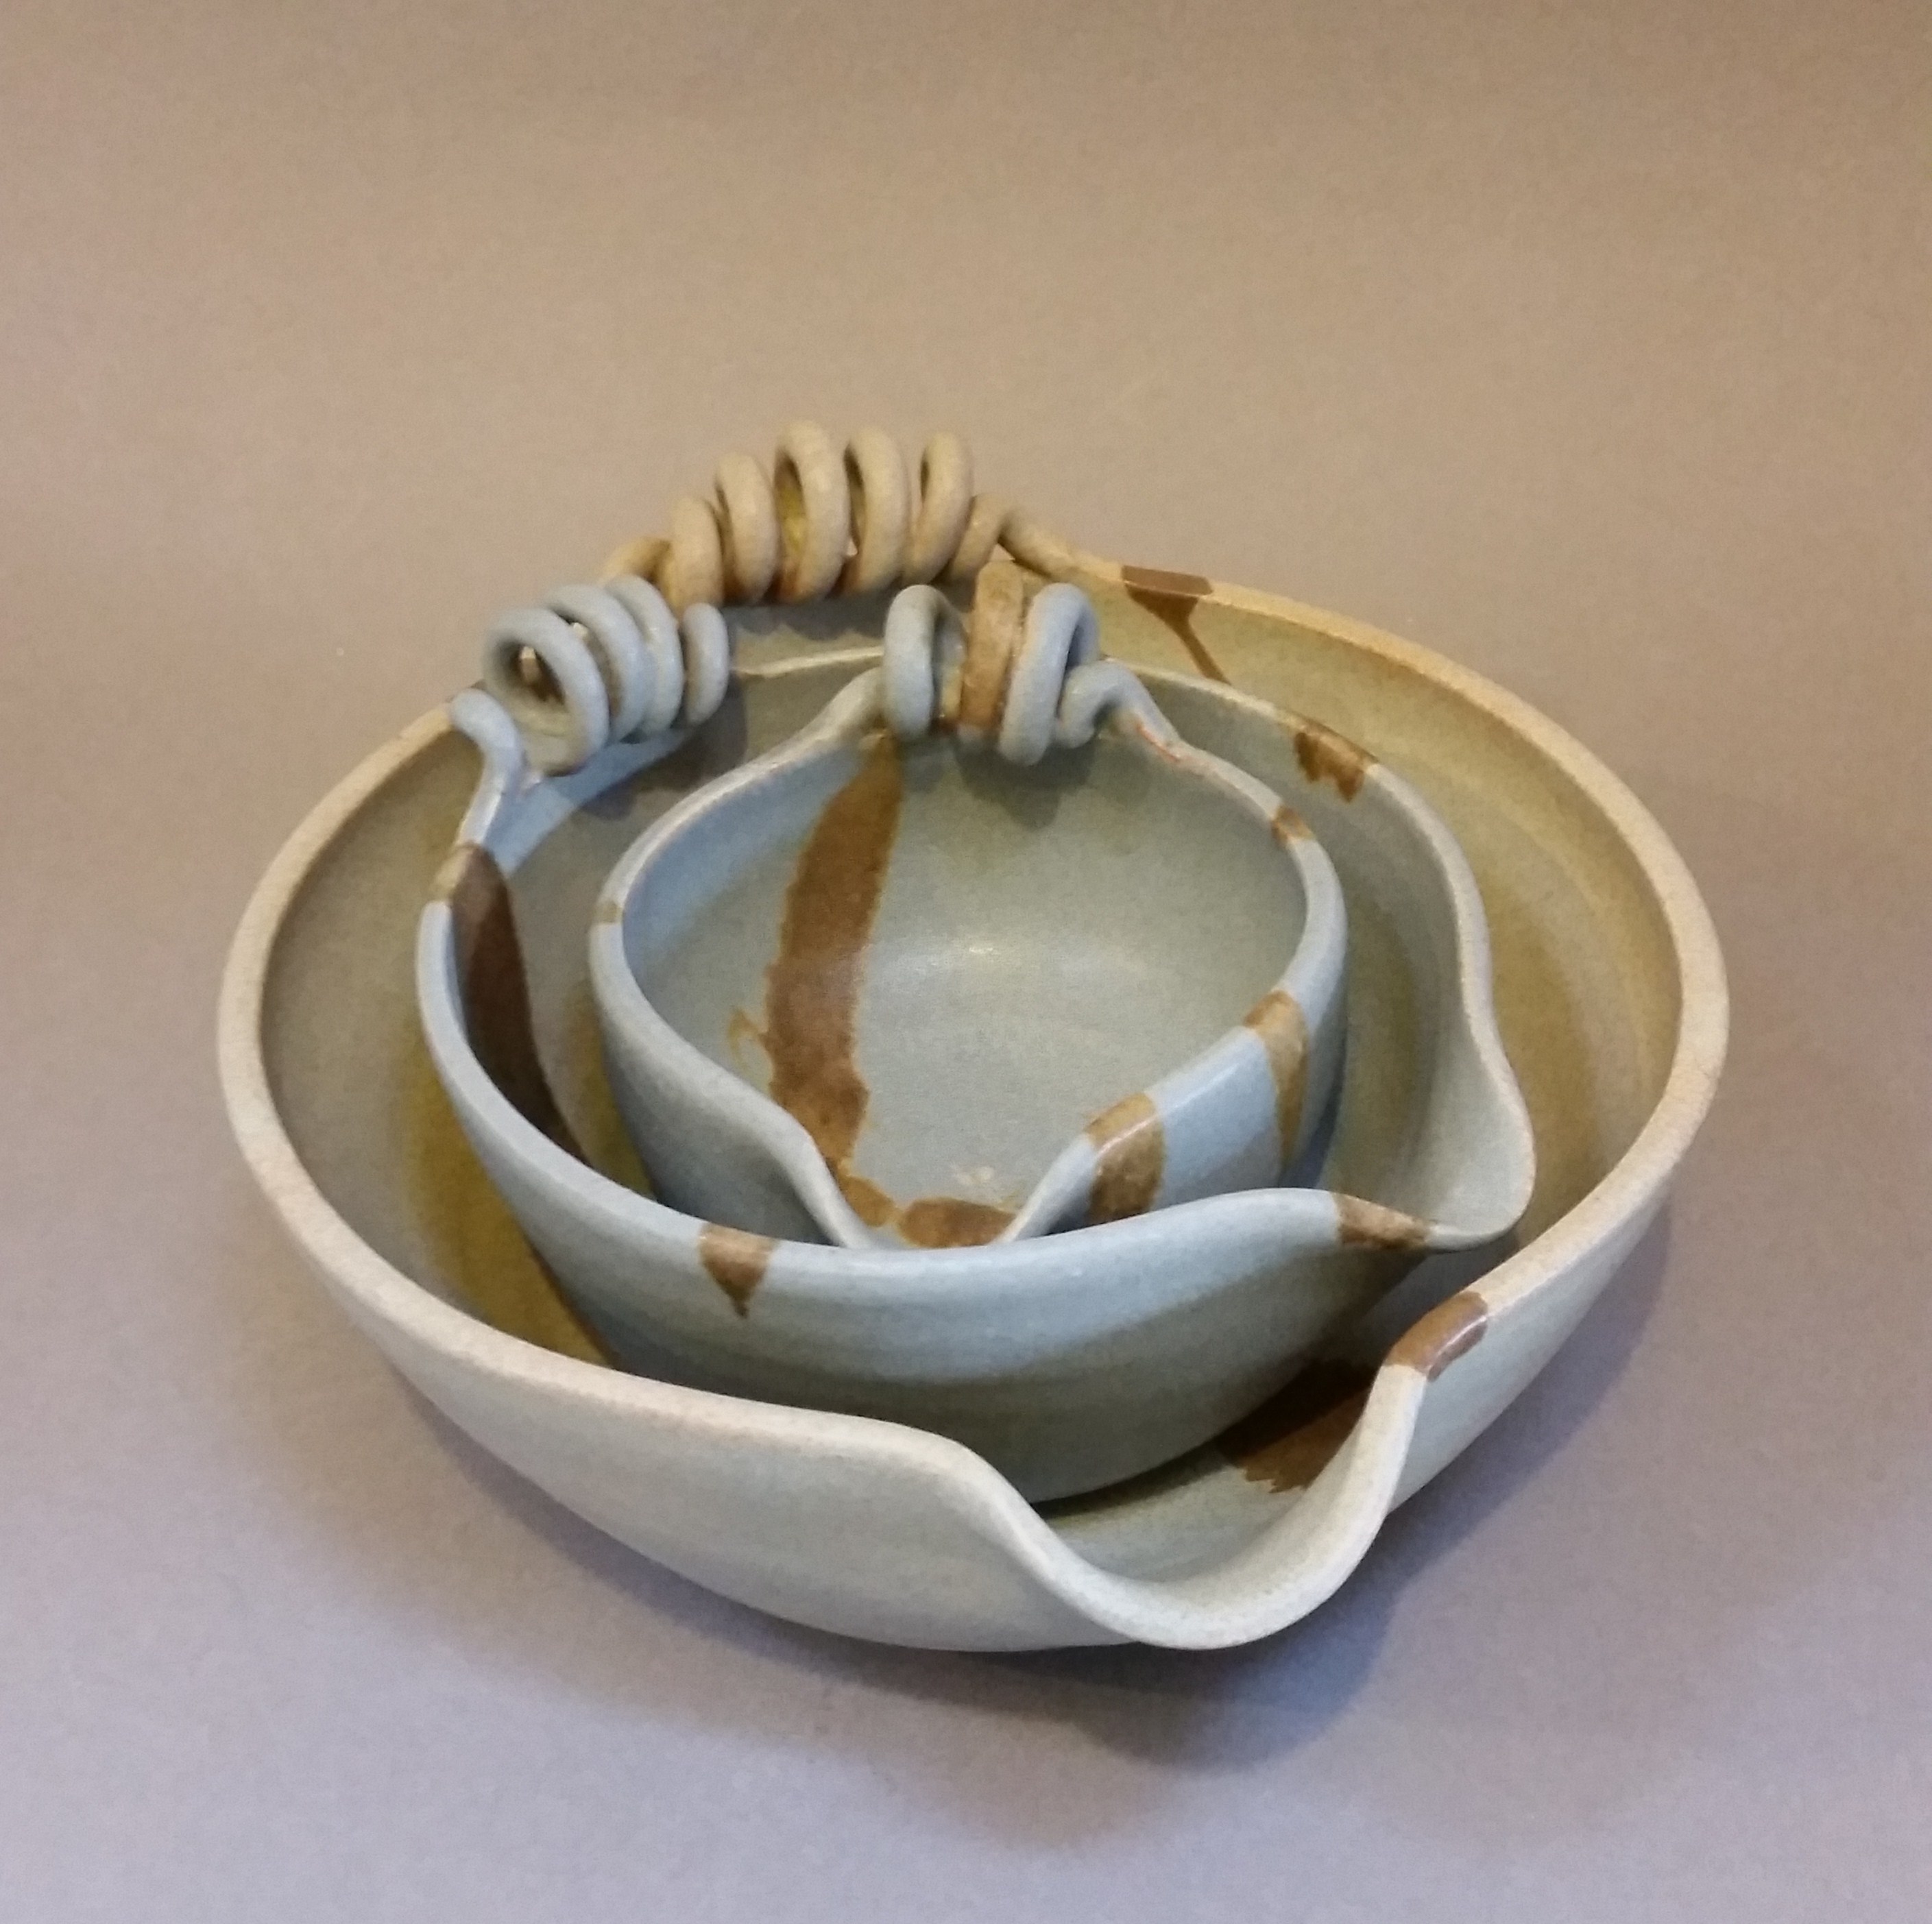 Grey pouring bowls